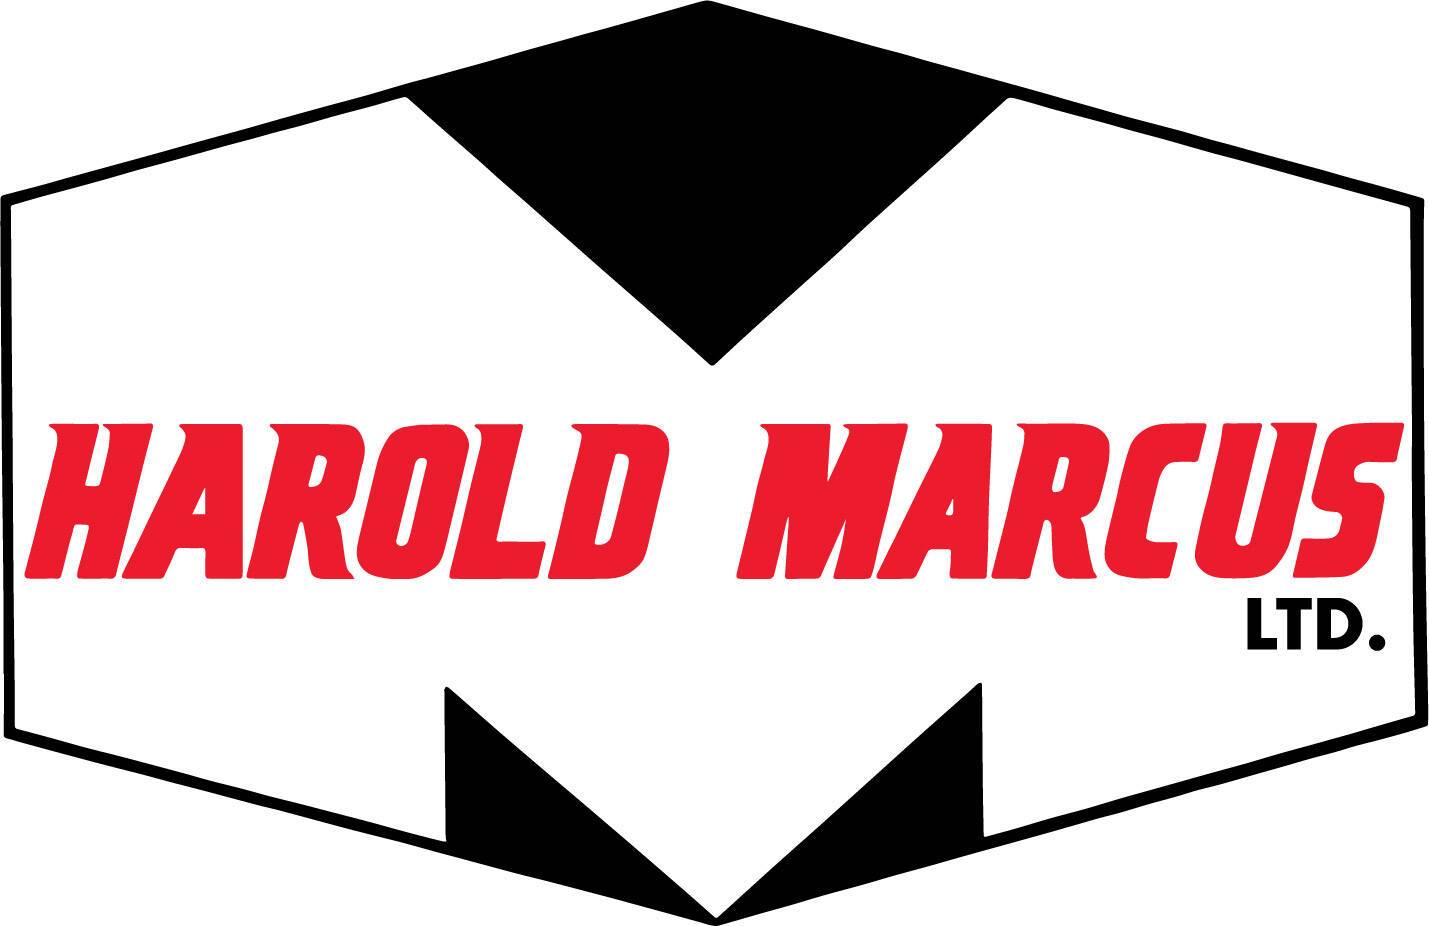 Harold Marcus Limited